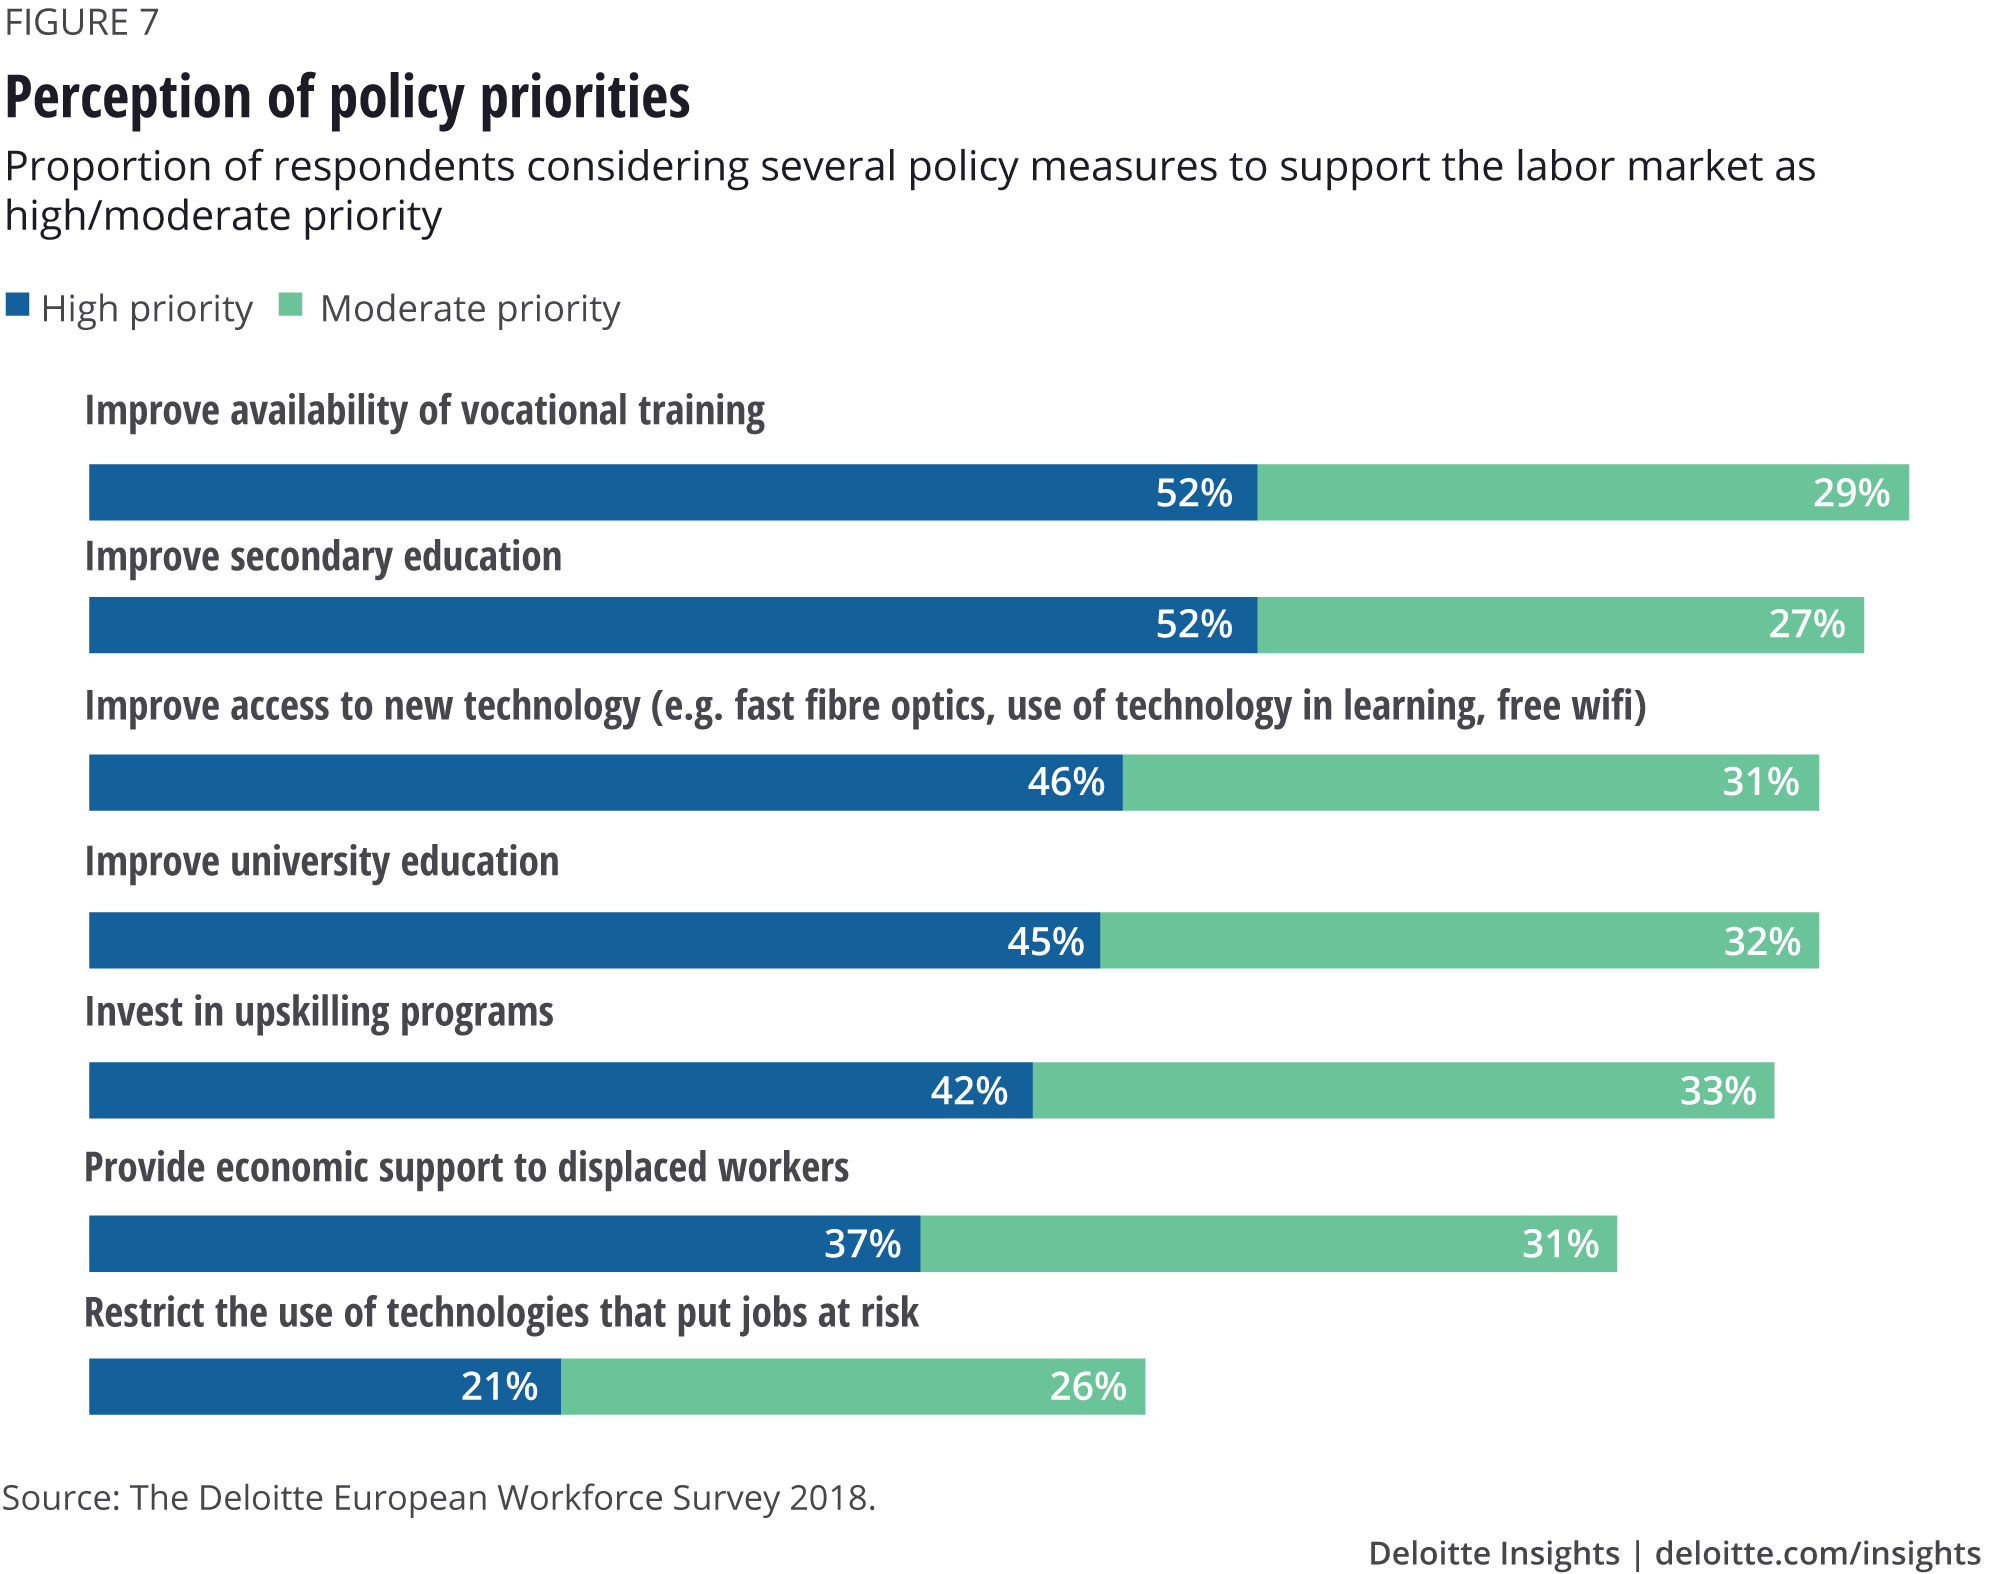 Perception of policy priorities